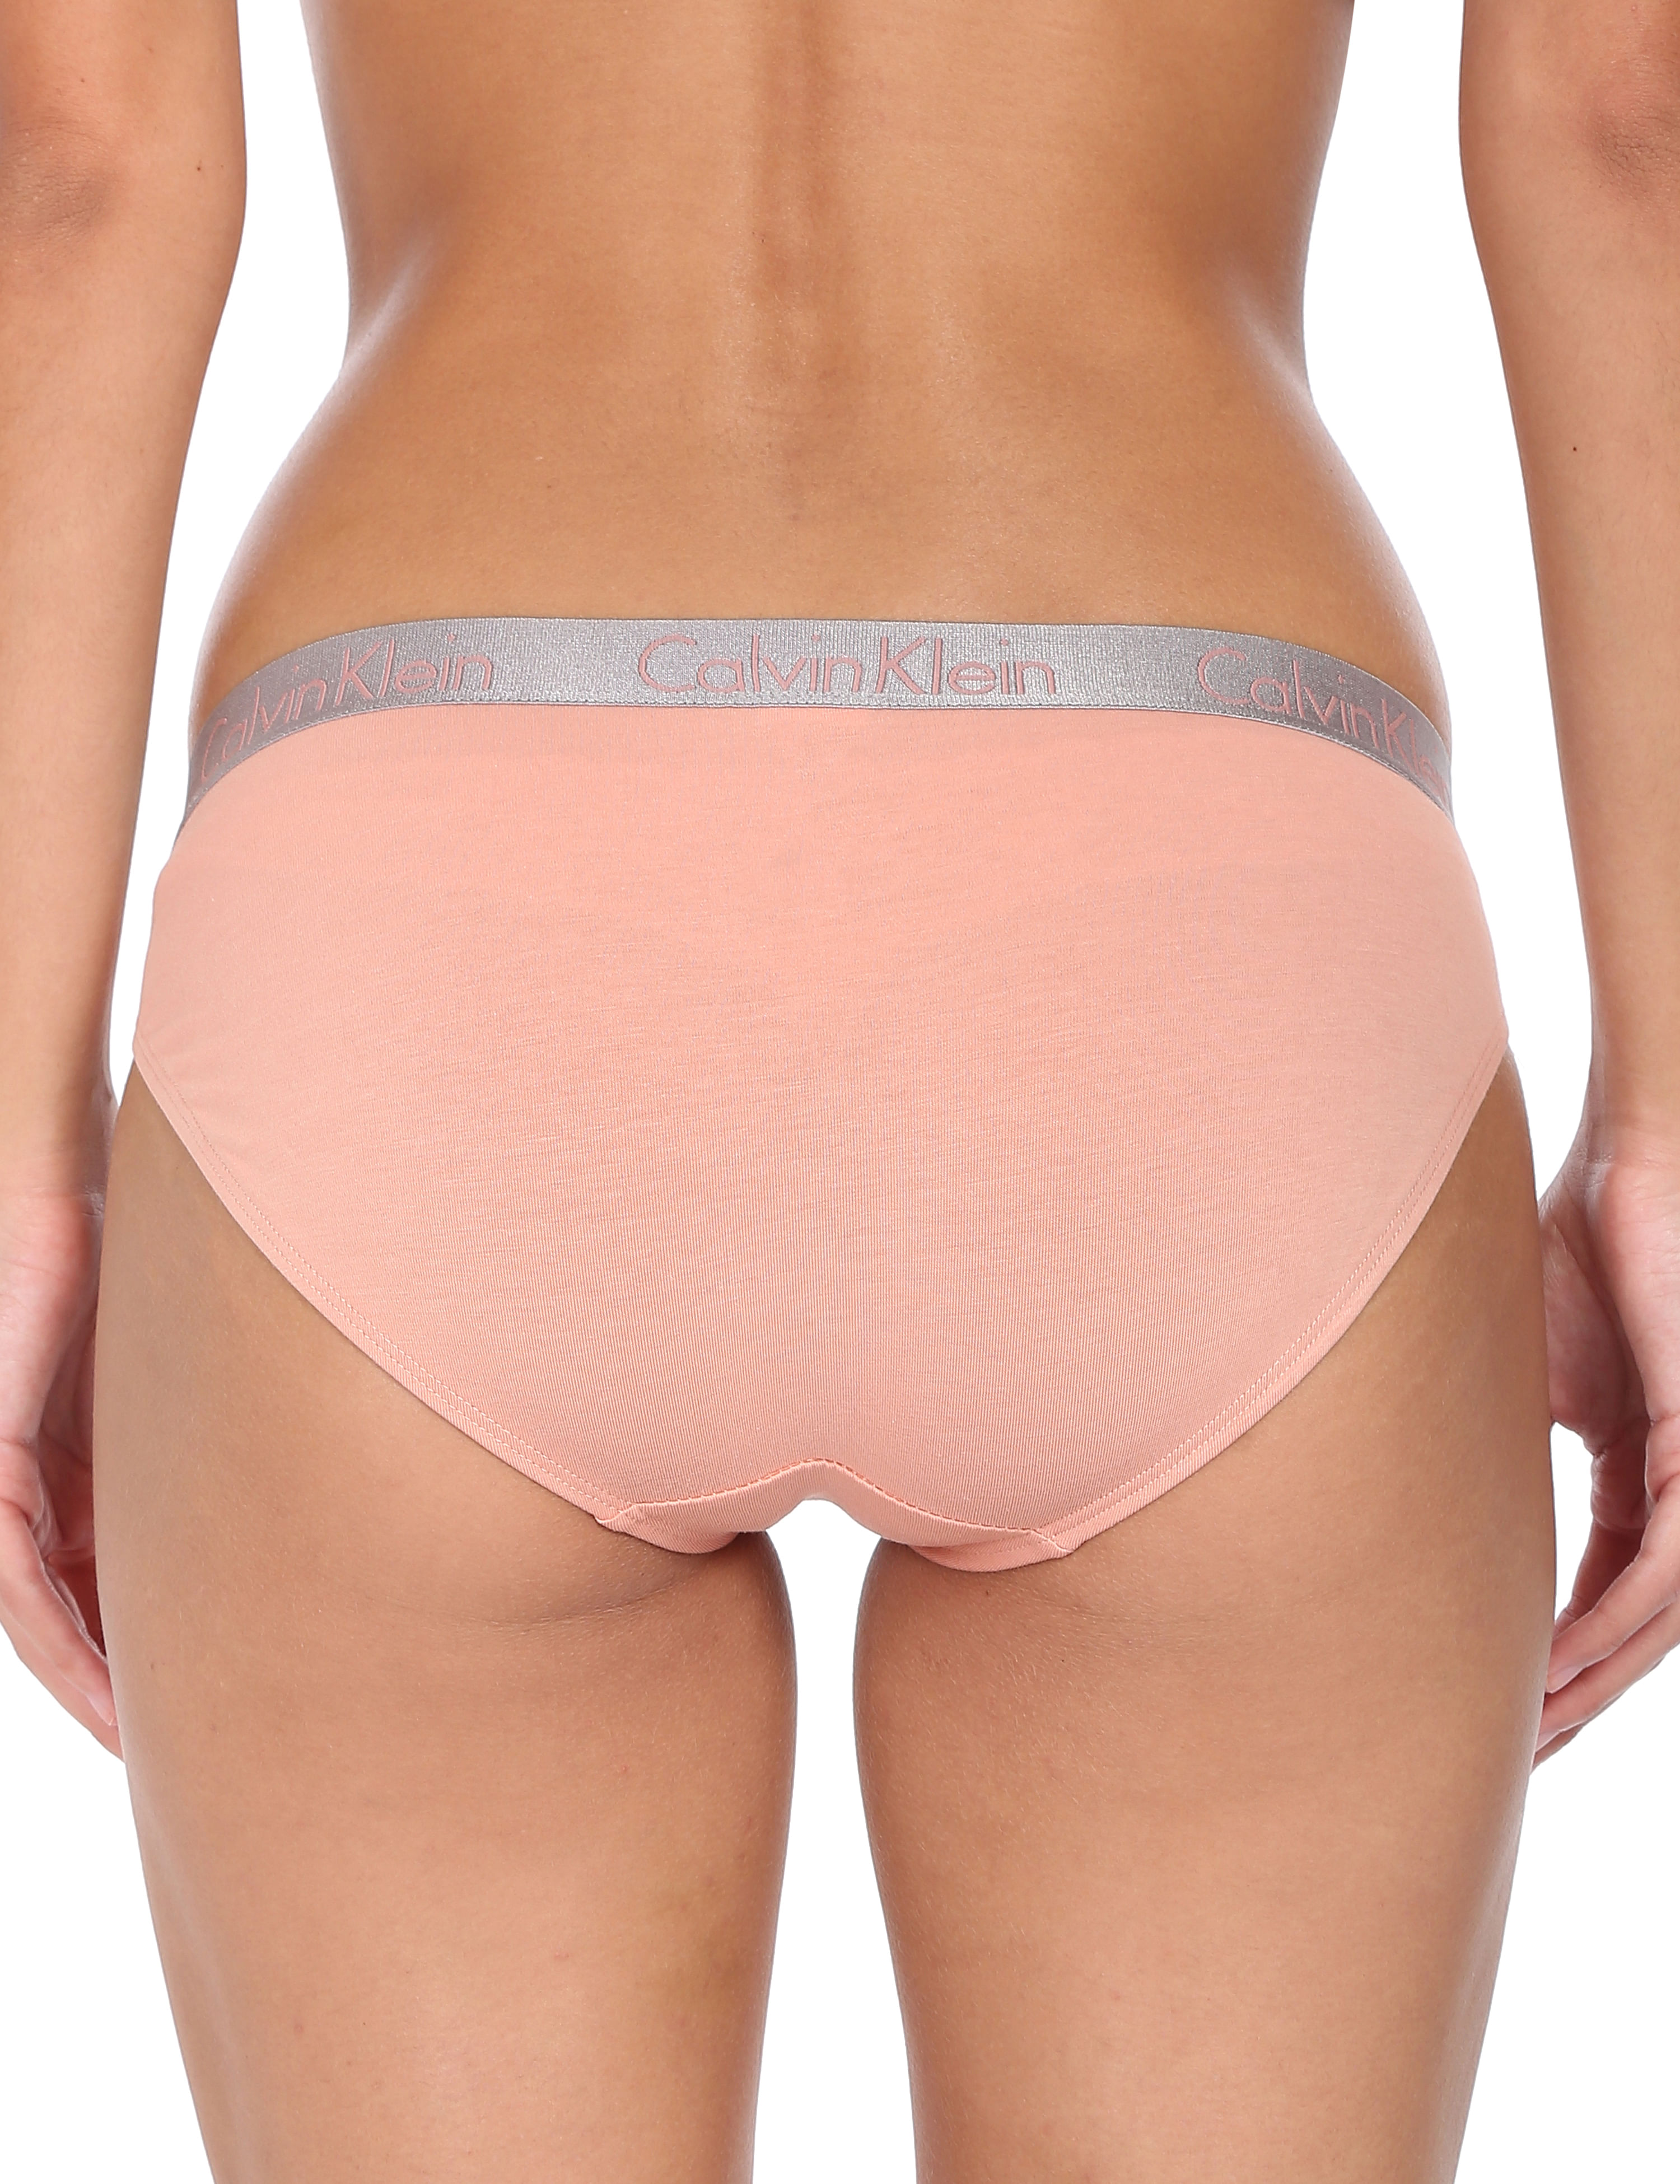 MOVING PEACH Seamless panties women underwear Ice Silk Mid-Rise Thong One  piece Panty brief S-XL